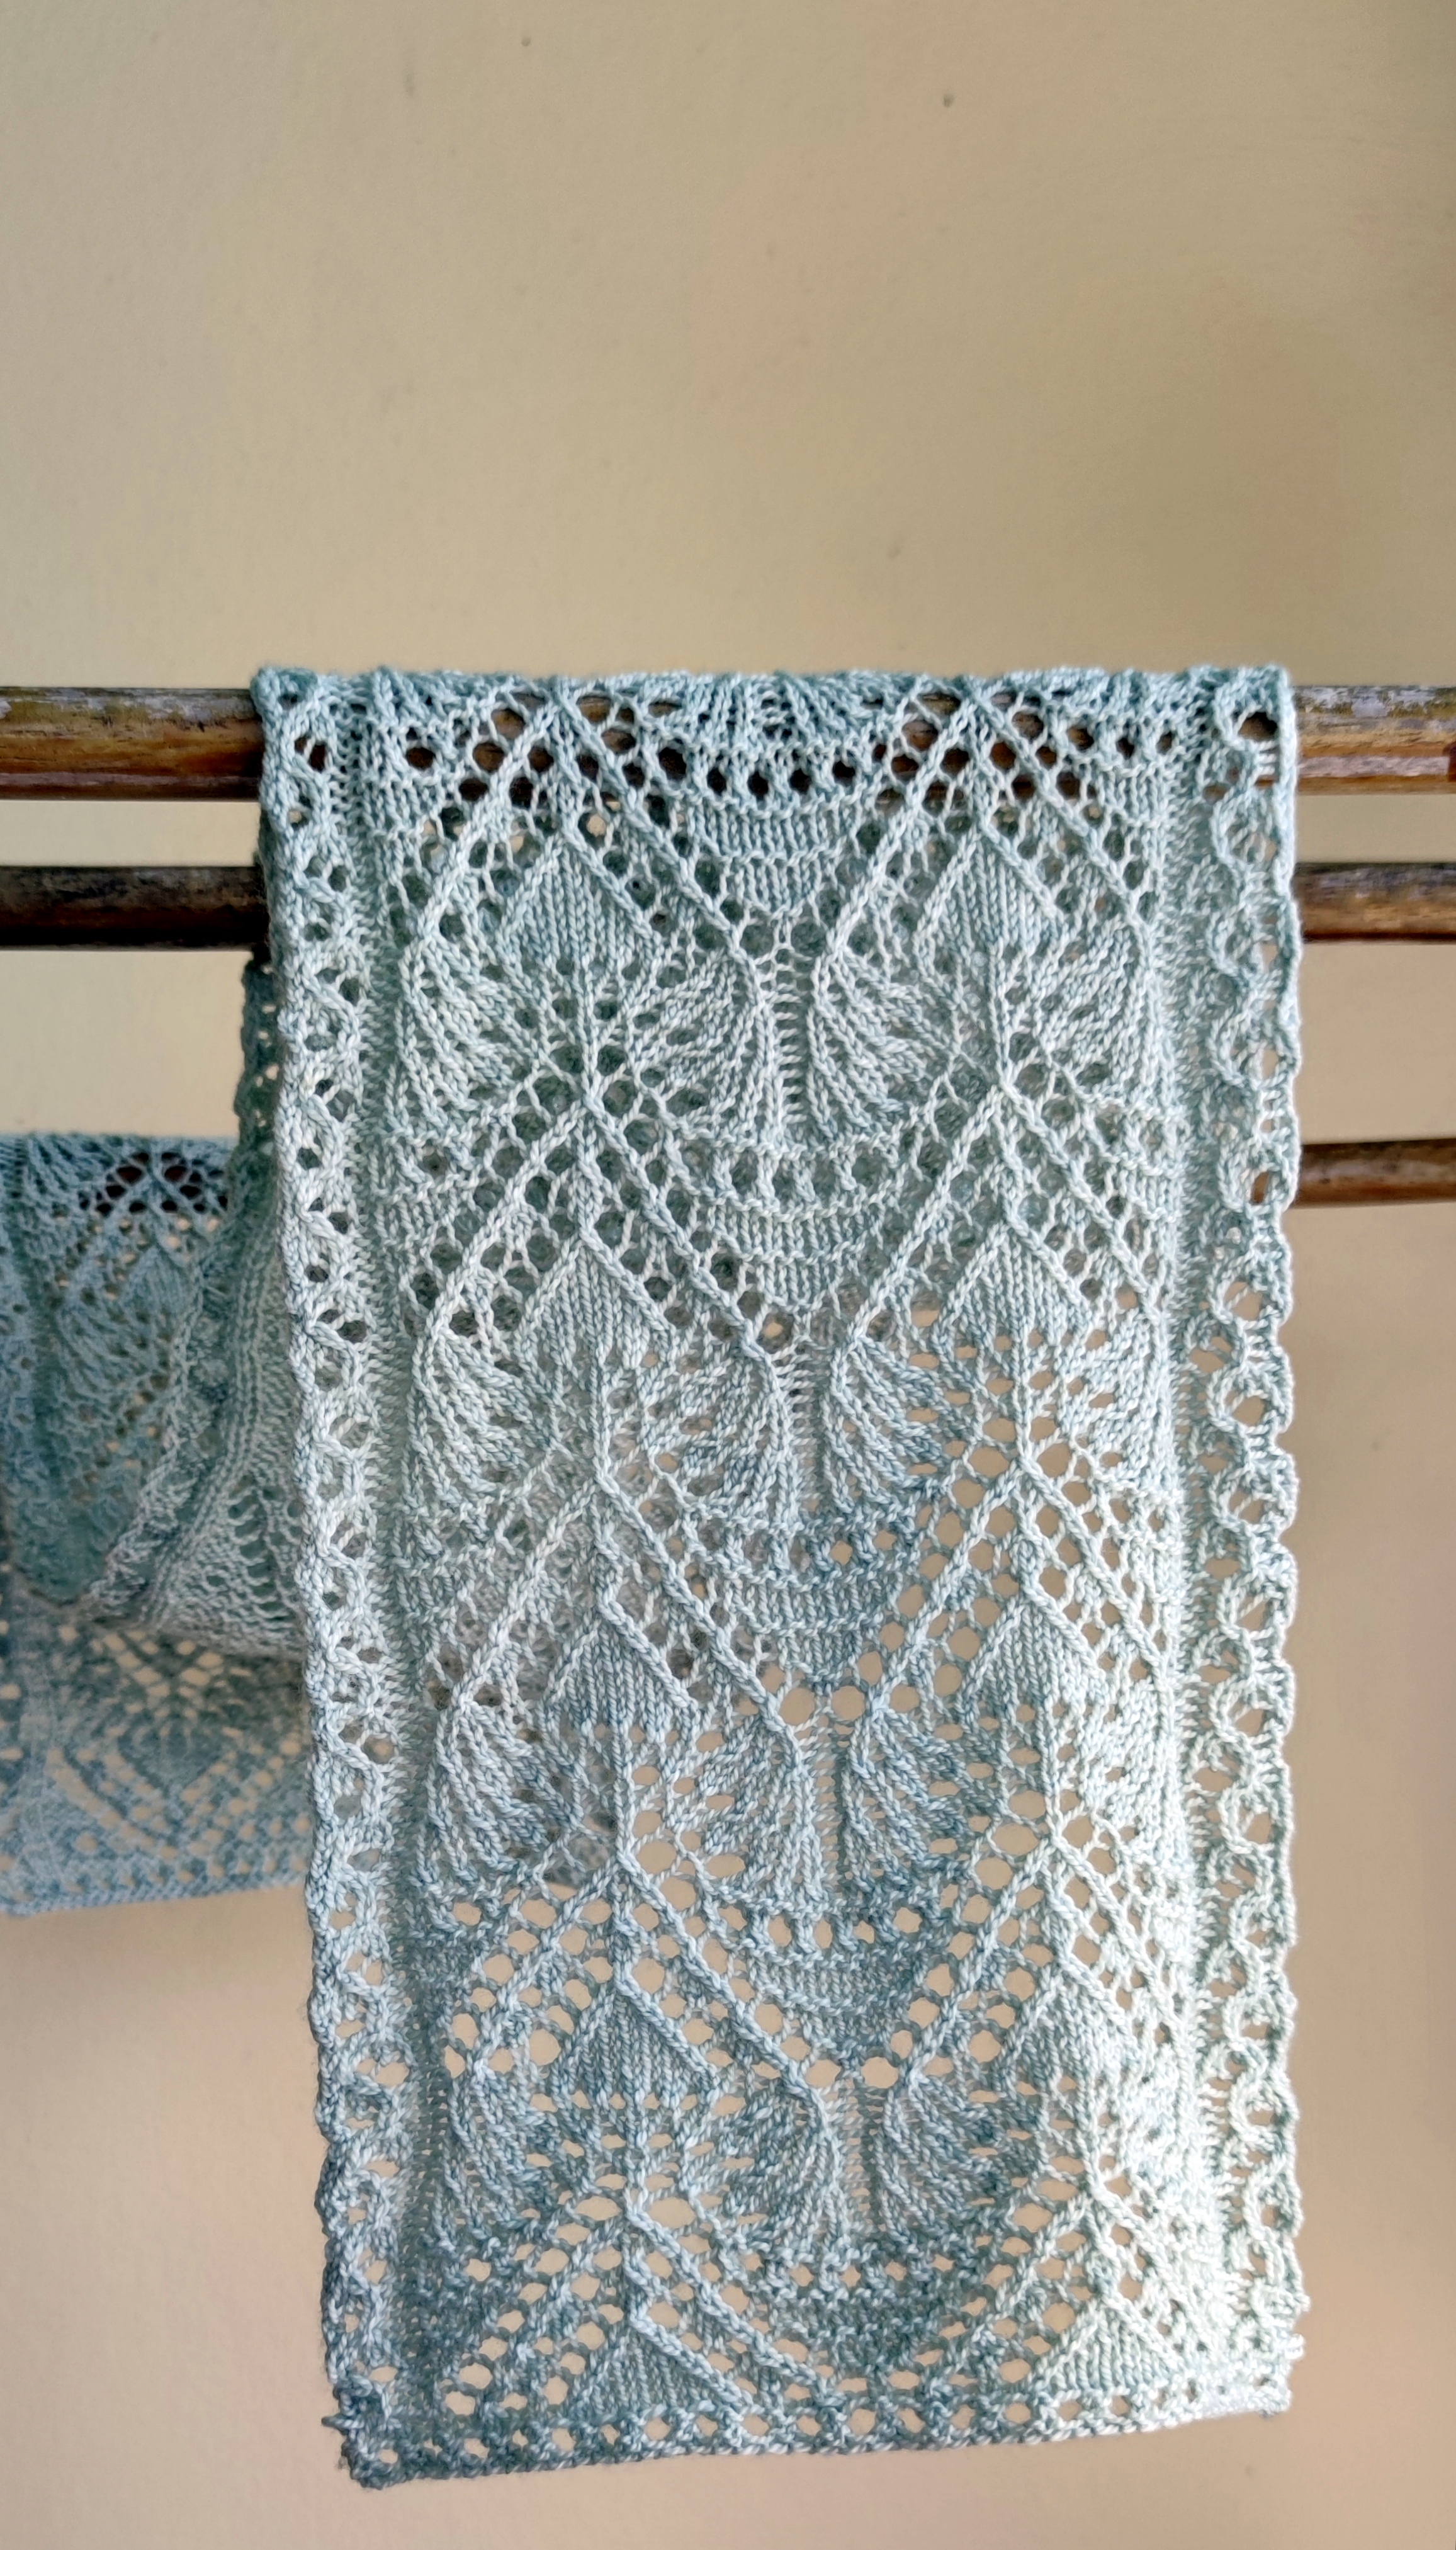 A lacy leaf scarf in a pale silver is draped over a wooden rod.